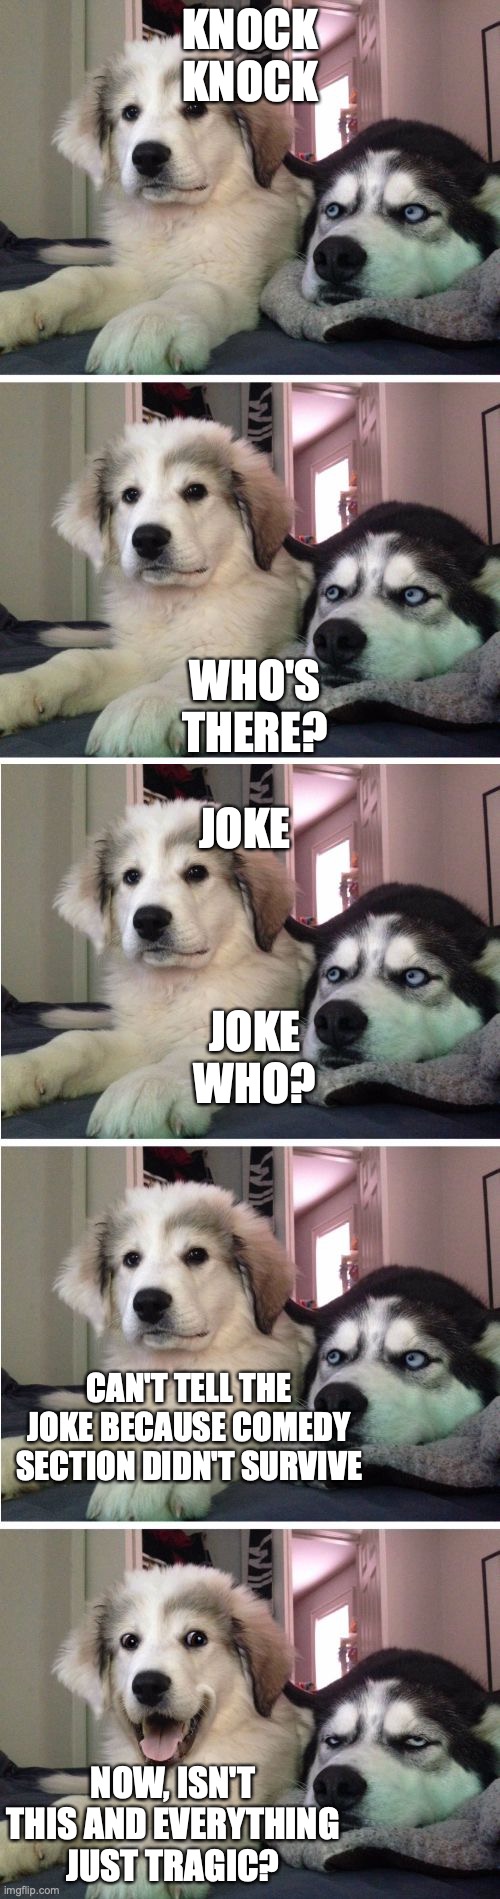 Knock Knock Dogs | KNOCK KNOCK; WHO'S THERE? JOKE; JOKE WHO? CAN'T TELL THE JOKE BECAUSE COMEDY SECTION DIDN'T SURVIVE; NOW, ISN'T THIS AND EVERYTHING JUST TRAGIC? | image tagged in knock knock dogs | made w/ Imgflip meme maker